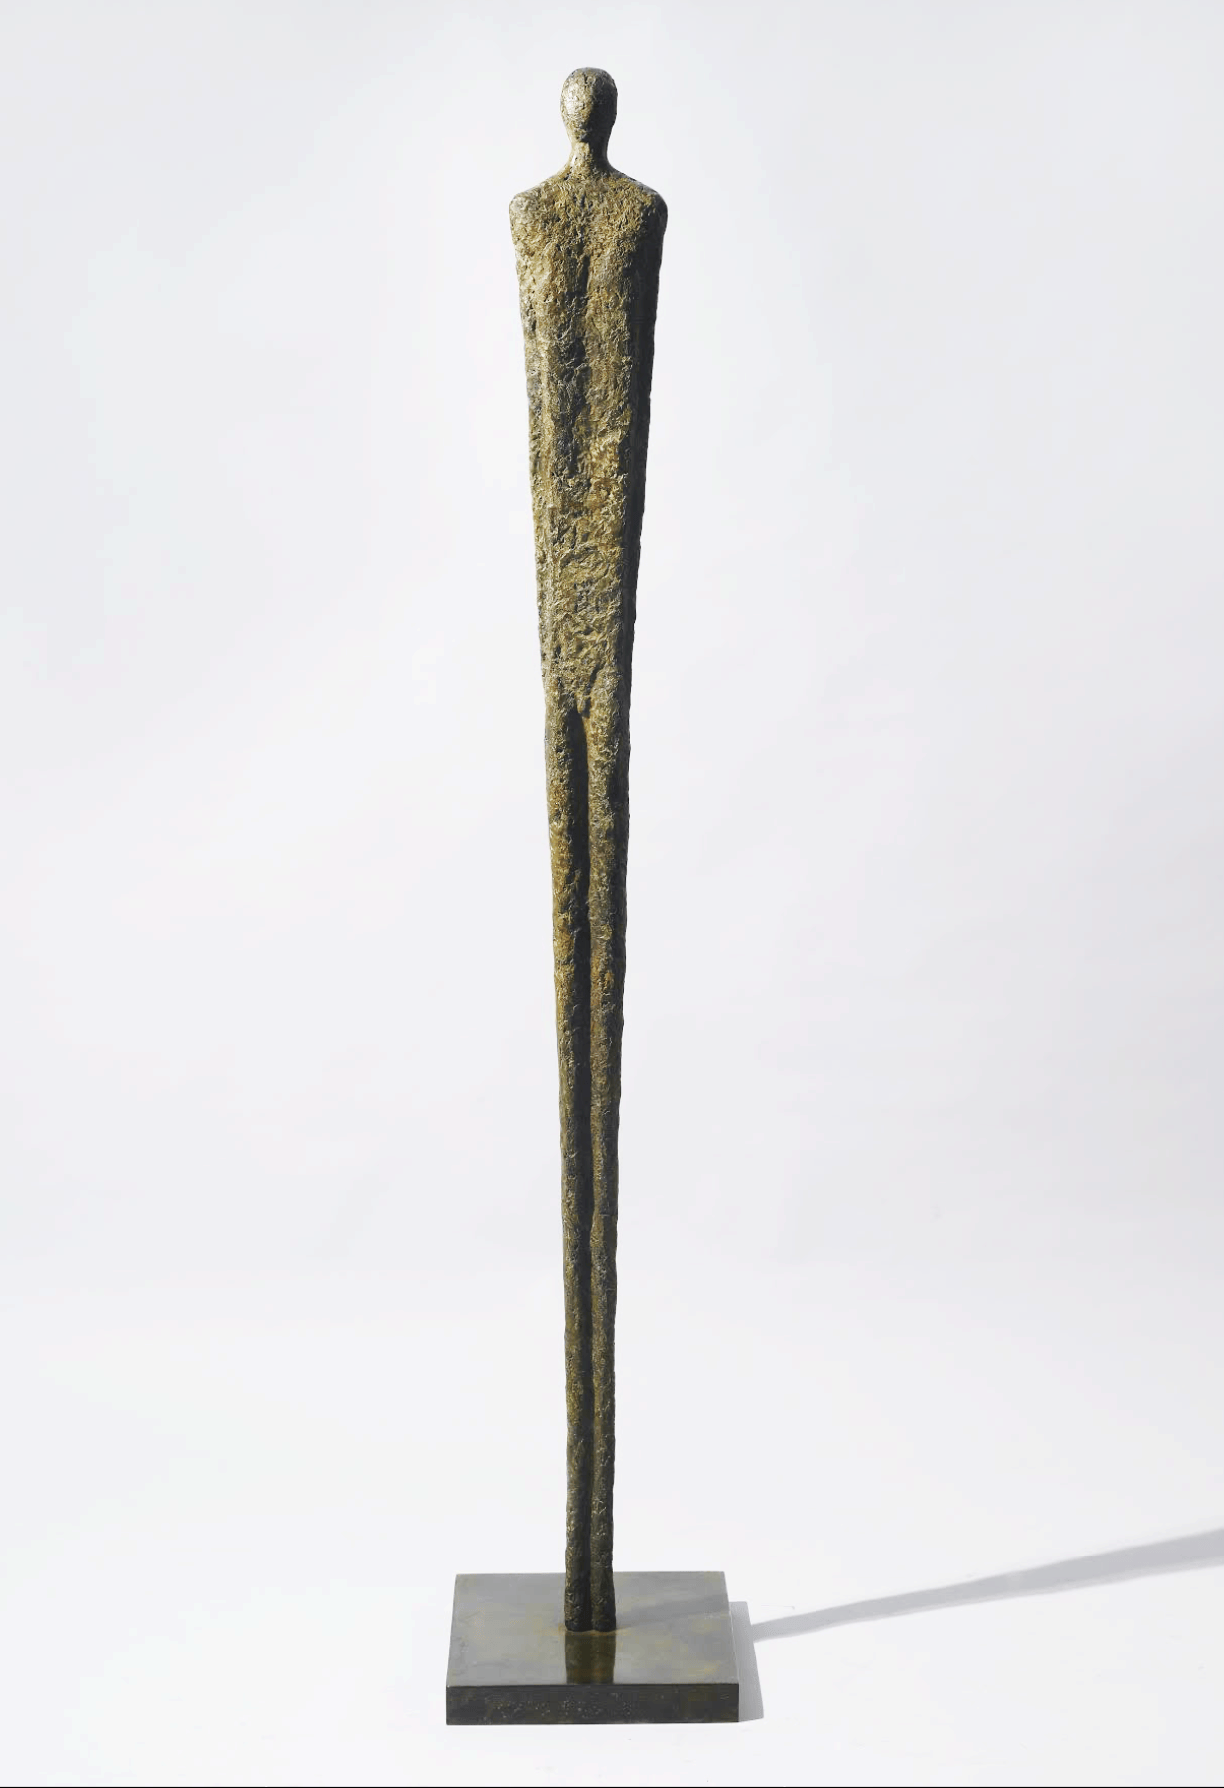 HOMME_TOTEM_Bronze_185cm / 72,8 inches